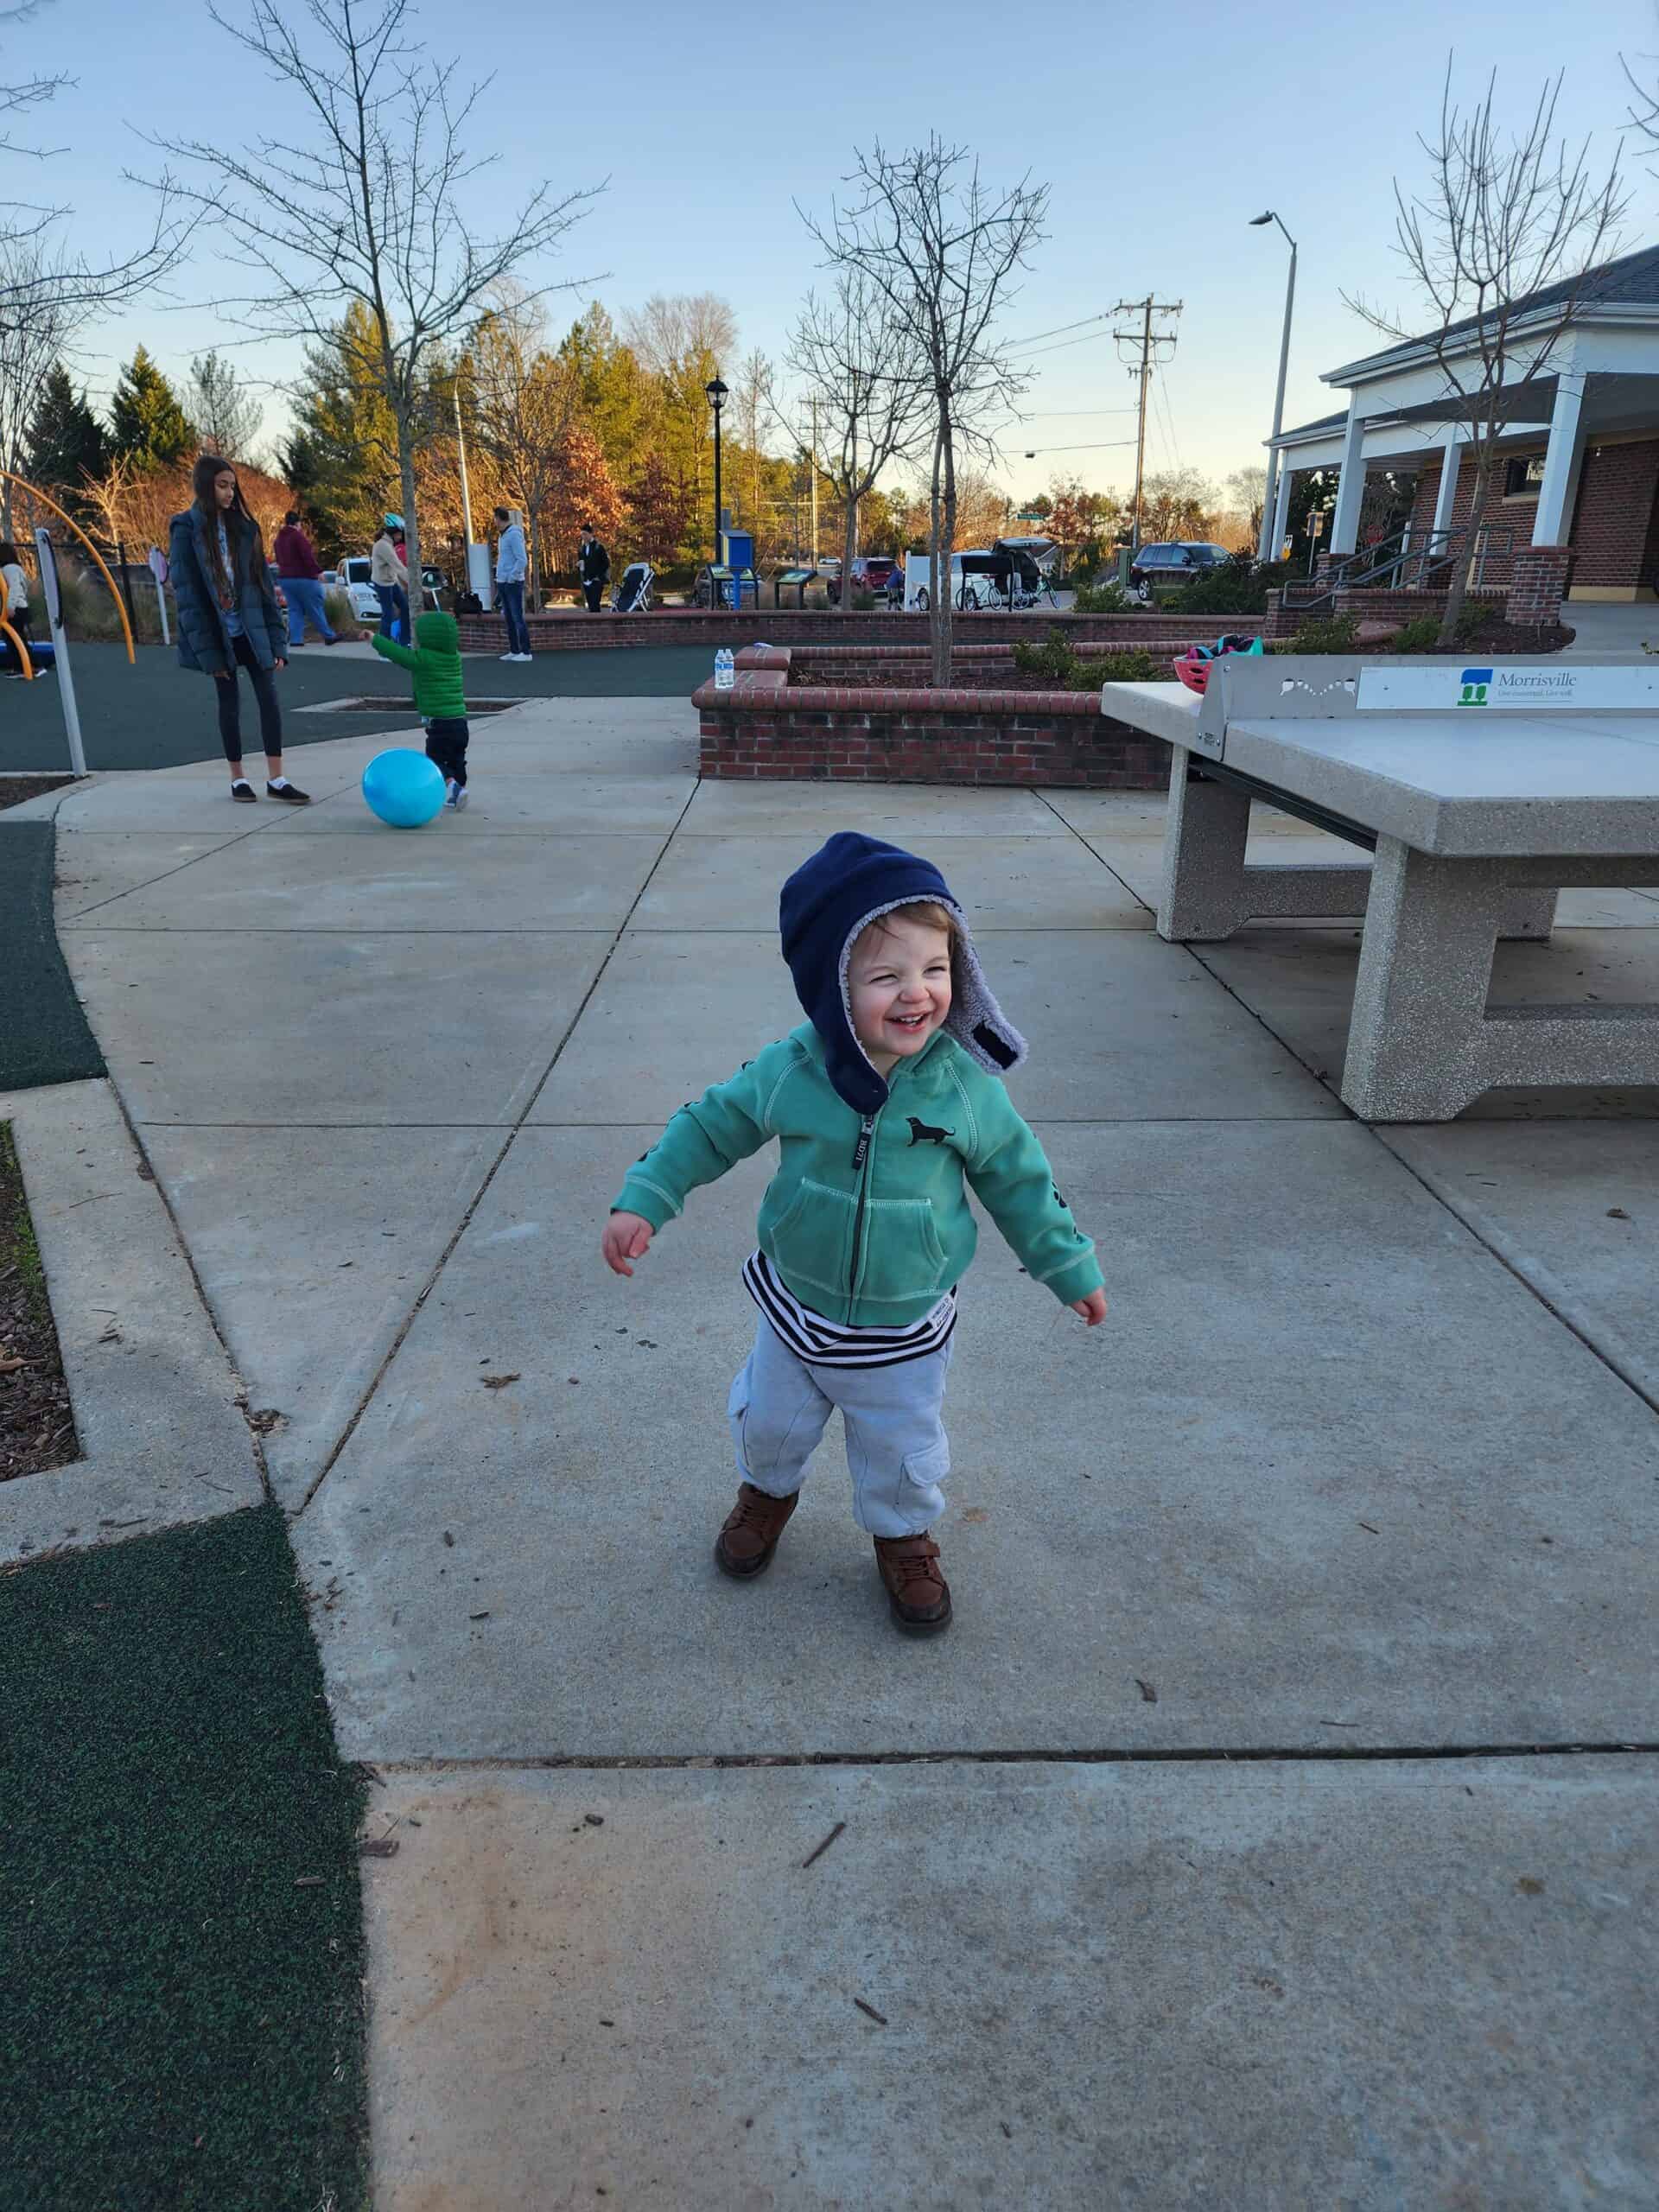 Excited toddler in a green hoodie and blue beanie walking towards the camera on a concrete path at a playground in Morrisville, North Carolina, with joyful expression. The background includes park benches and visitors enjoying the outdoor setting.